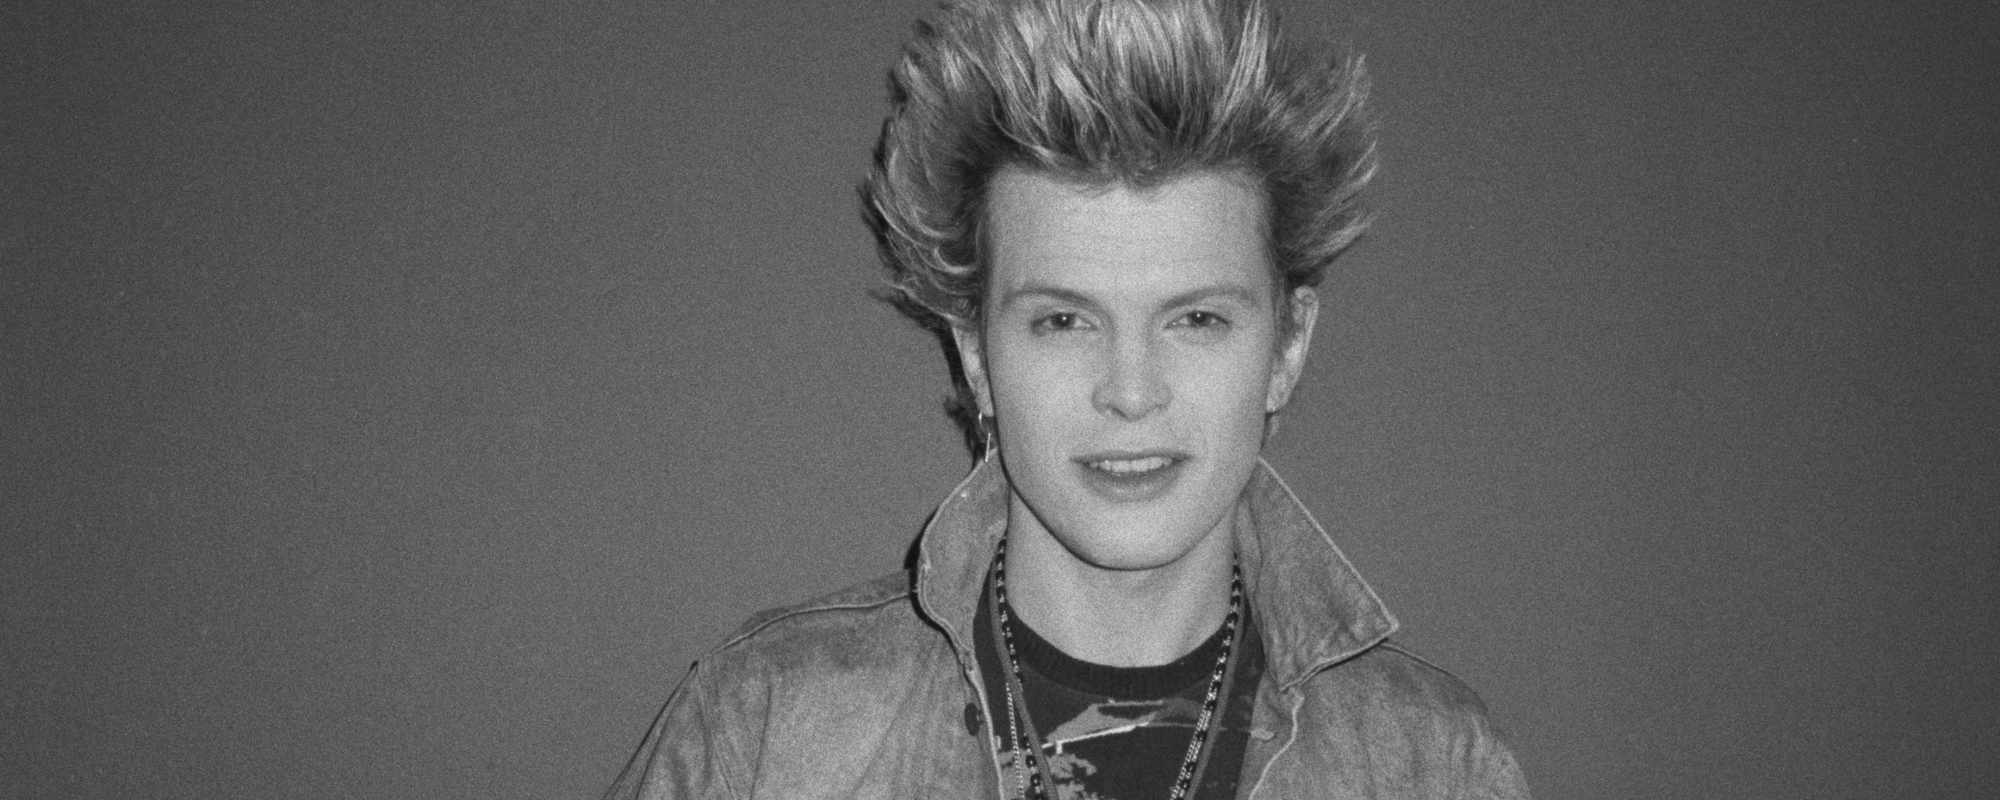 The Weird But Touching Meaning Behind Billy Idol’s “Sweet Sixteen”